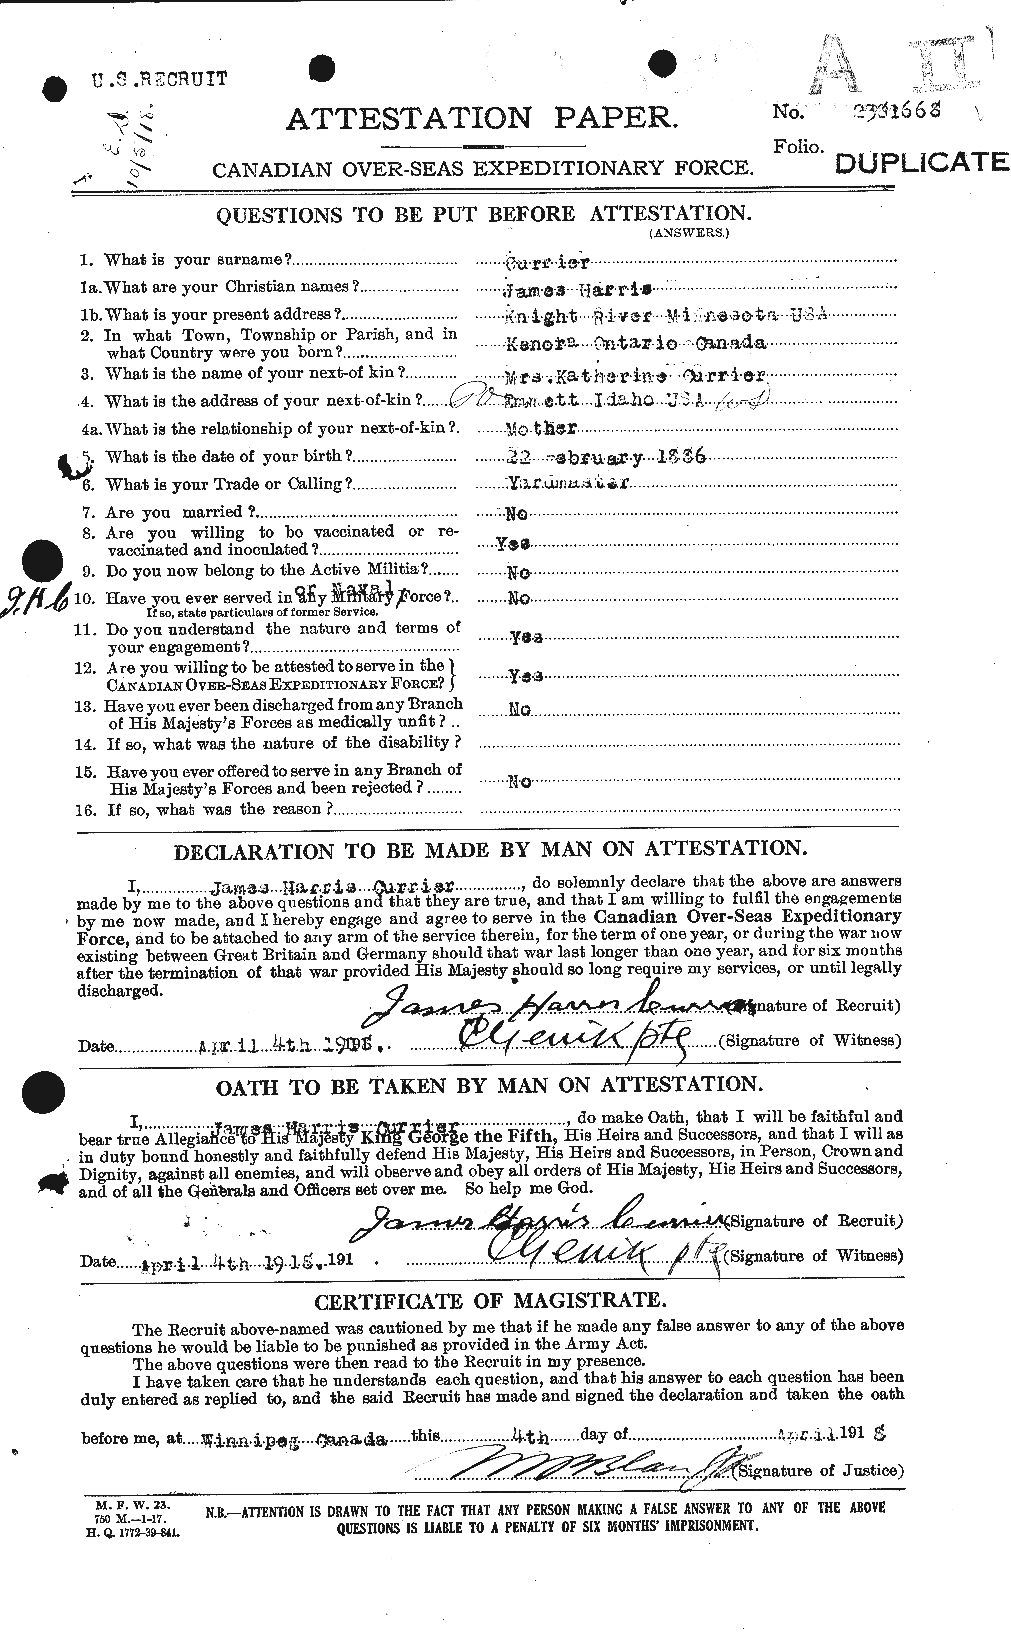 Personnel Records of the First World War - CEF 071413a